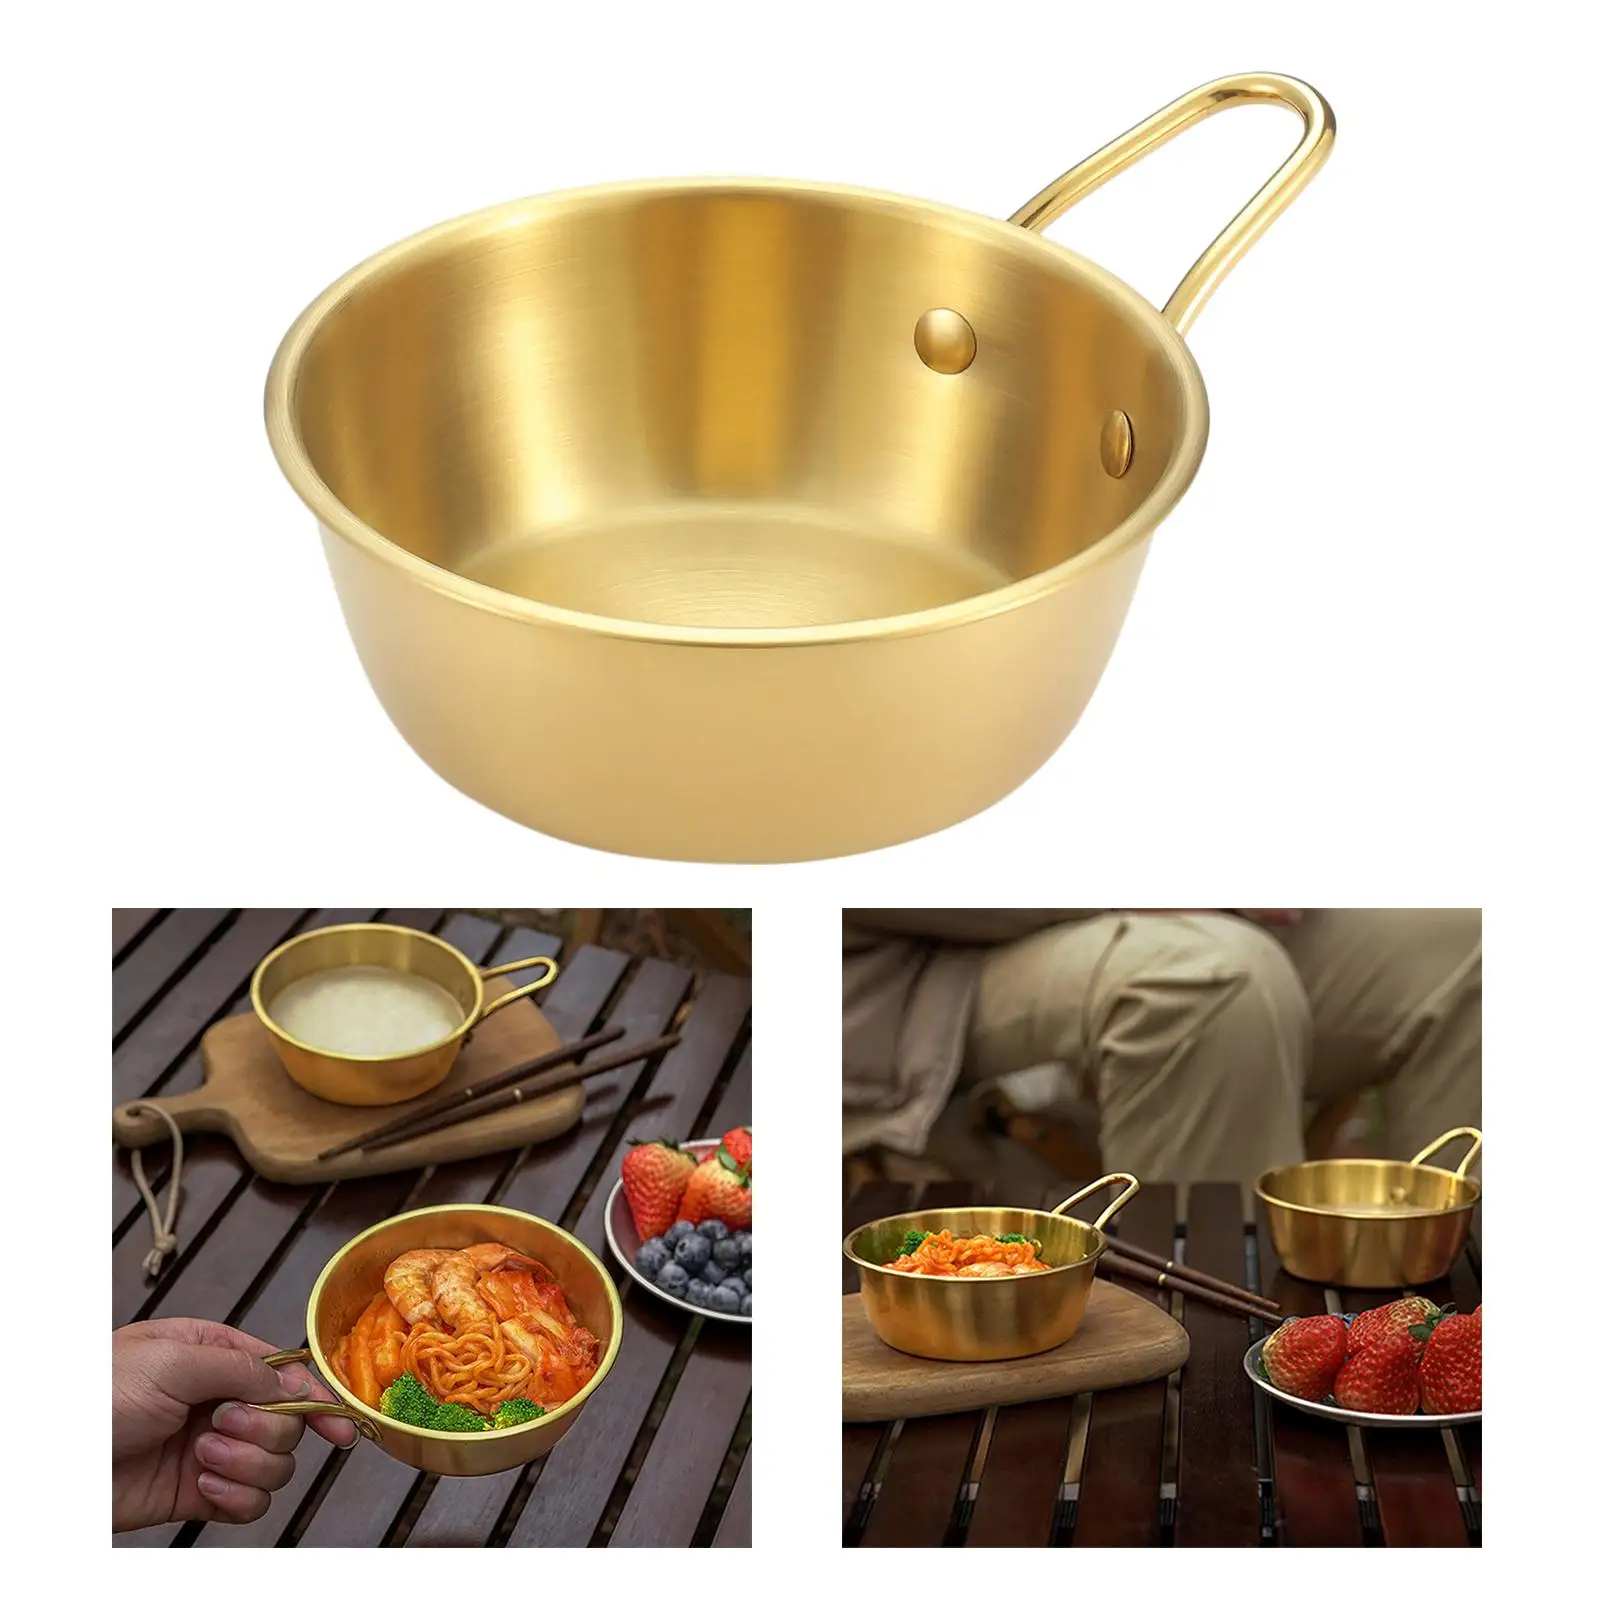 Portable Camping Bowl Dinnerware Stockpot Cooking Pot Utensil W/ Handle for Backpacking Beach  Home Kitchen